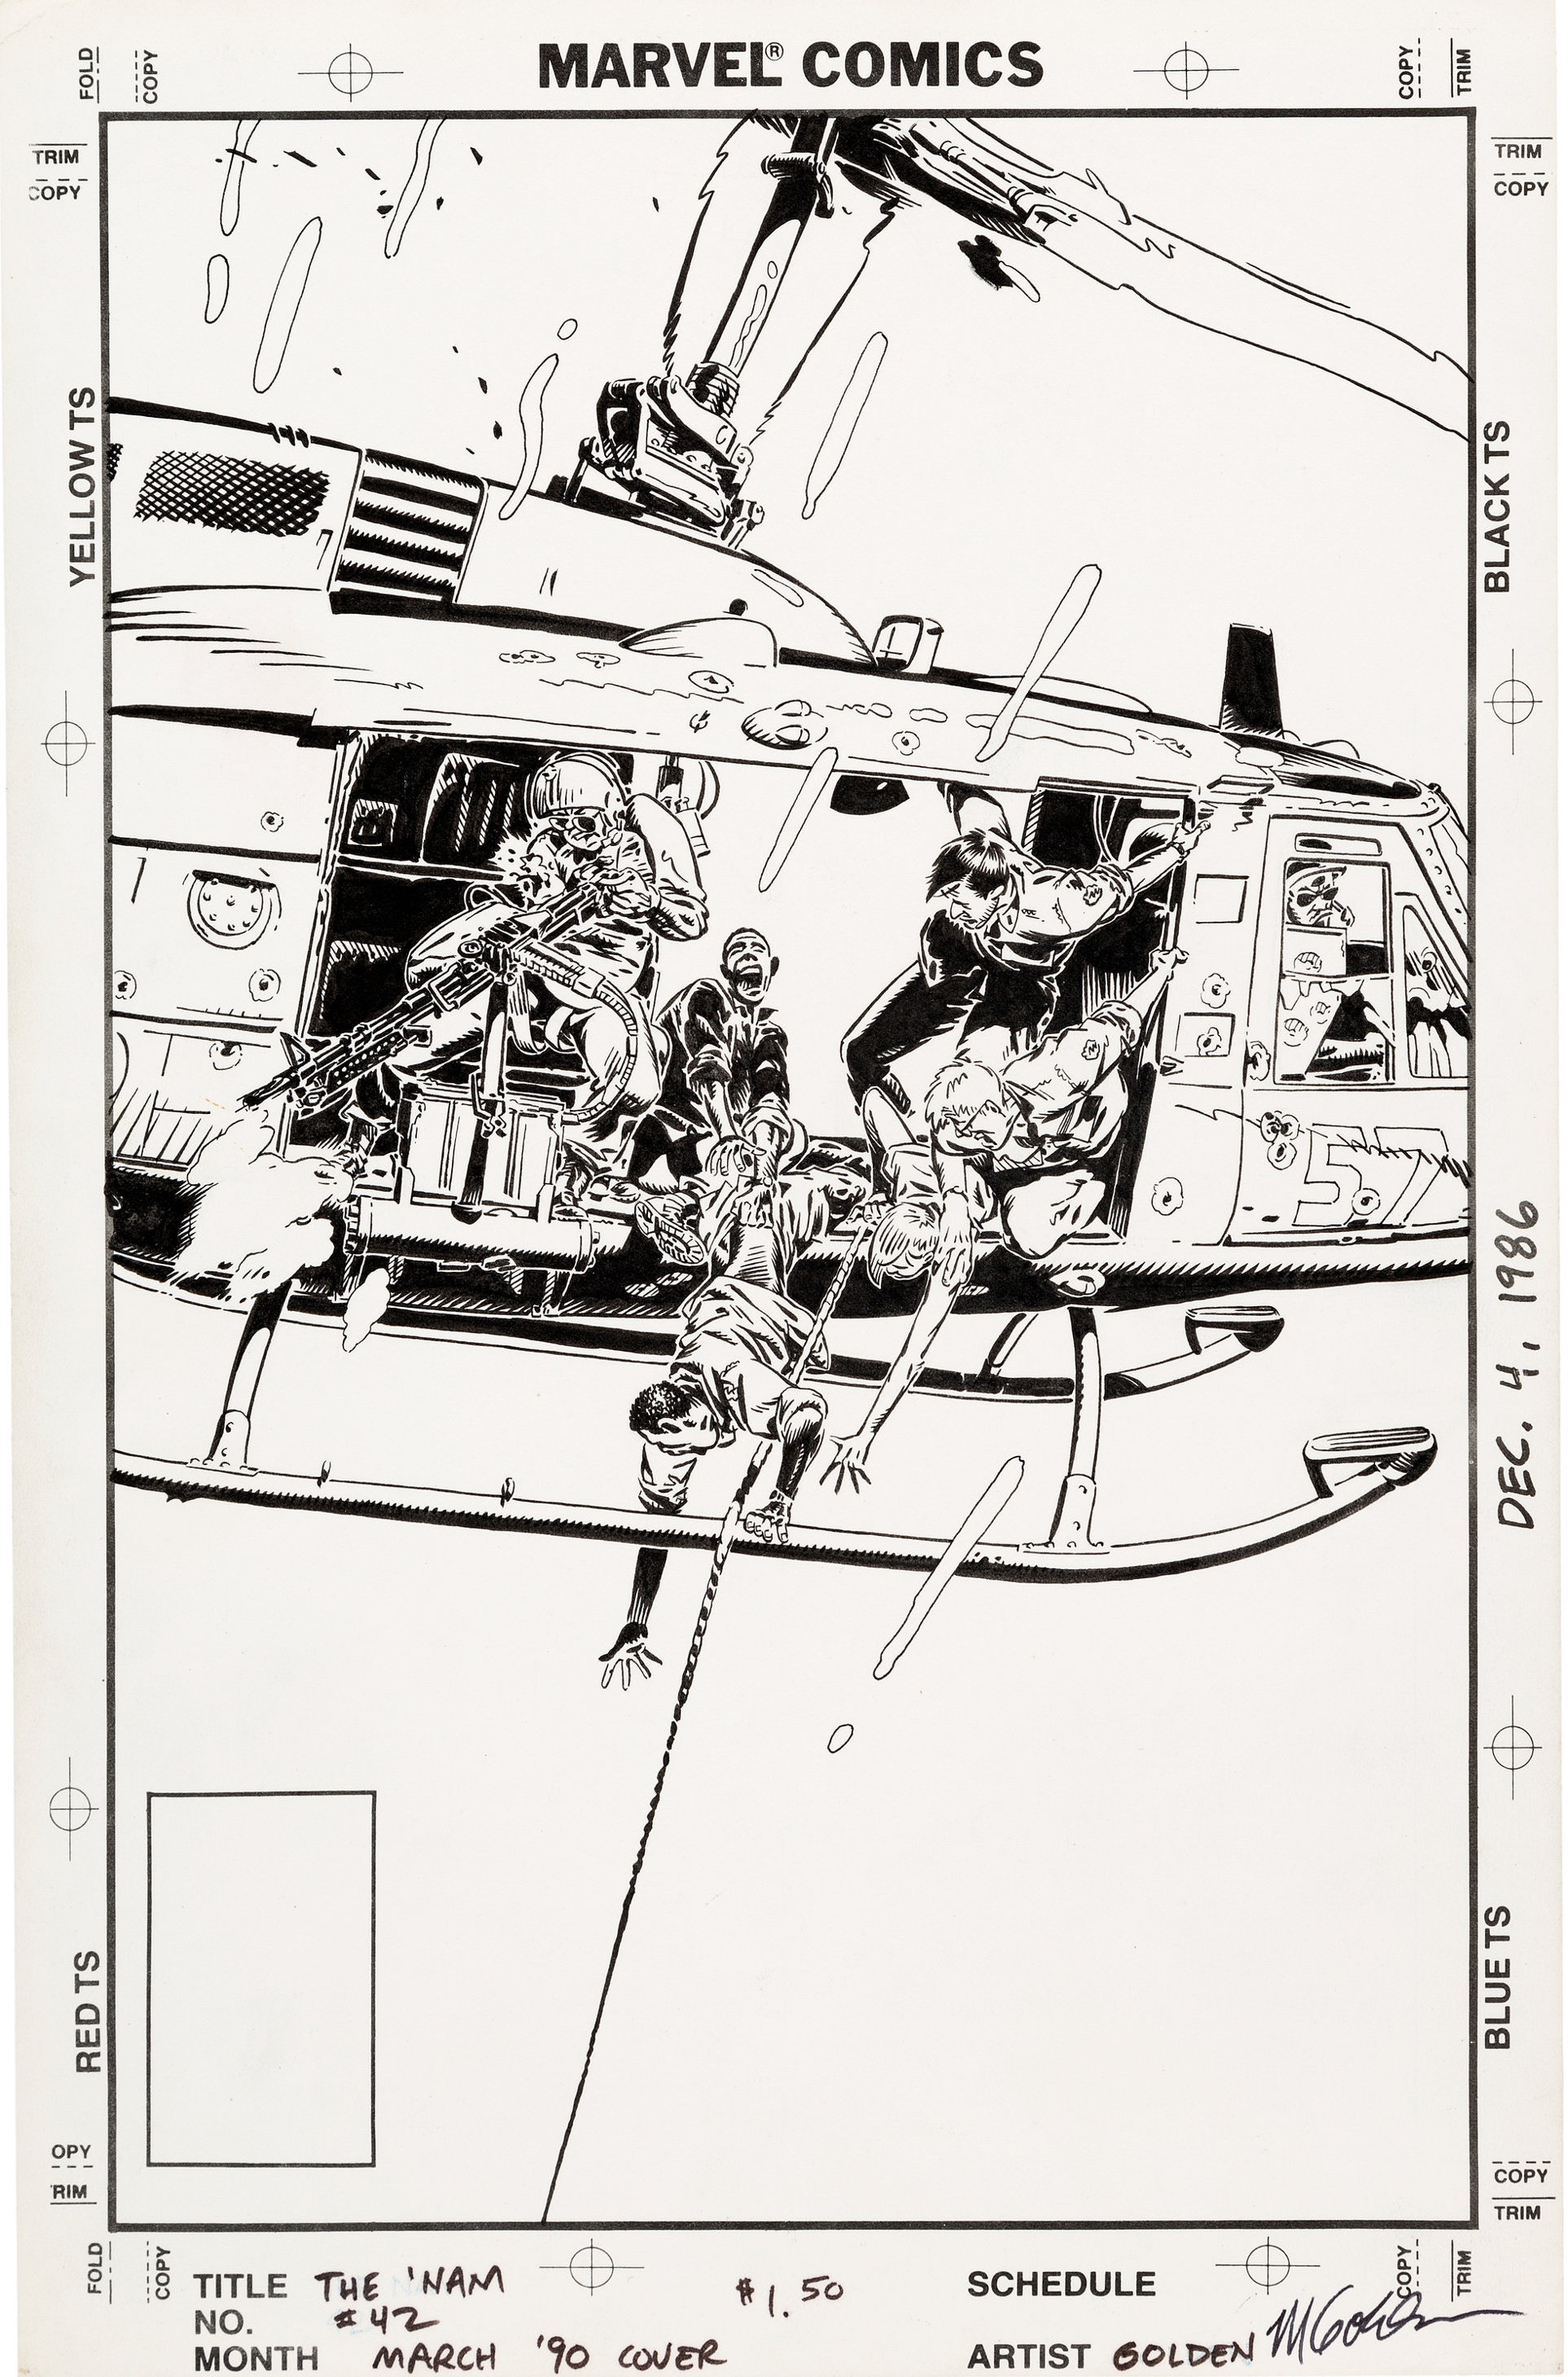 Michael Golden The 'Nam #42 cover